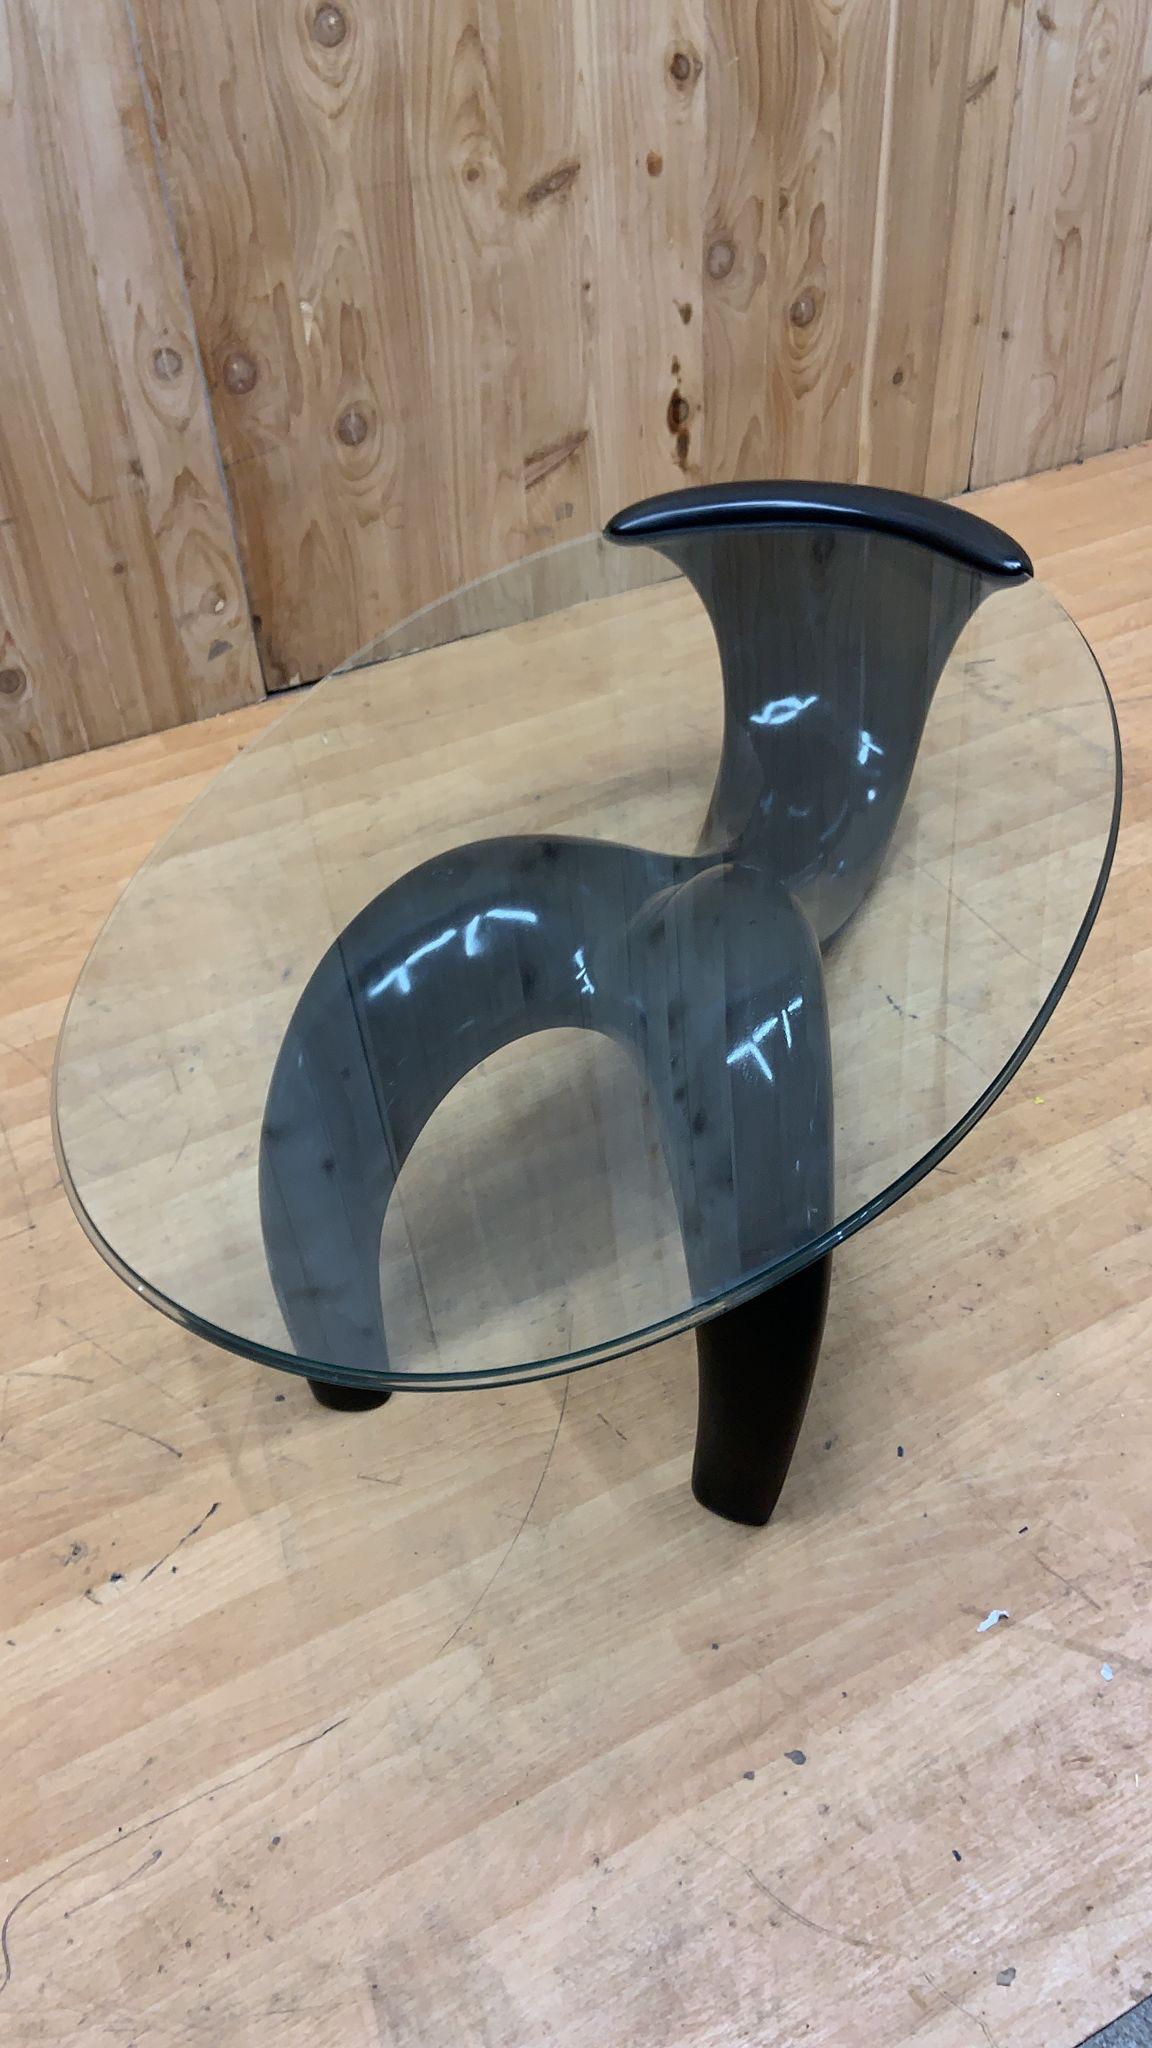 Mid Century Modern Black Abstract Fiberglass Sculptural Base Oval Glass Top Coffee Table

This mid century modern abstract black table is going to be a speaking point in any room that it is featured in. The base is constructed of fiberglass and the